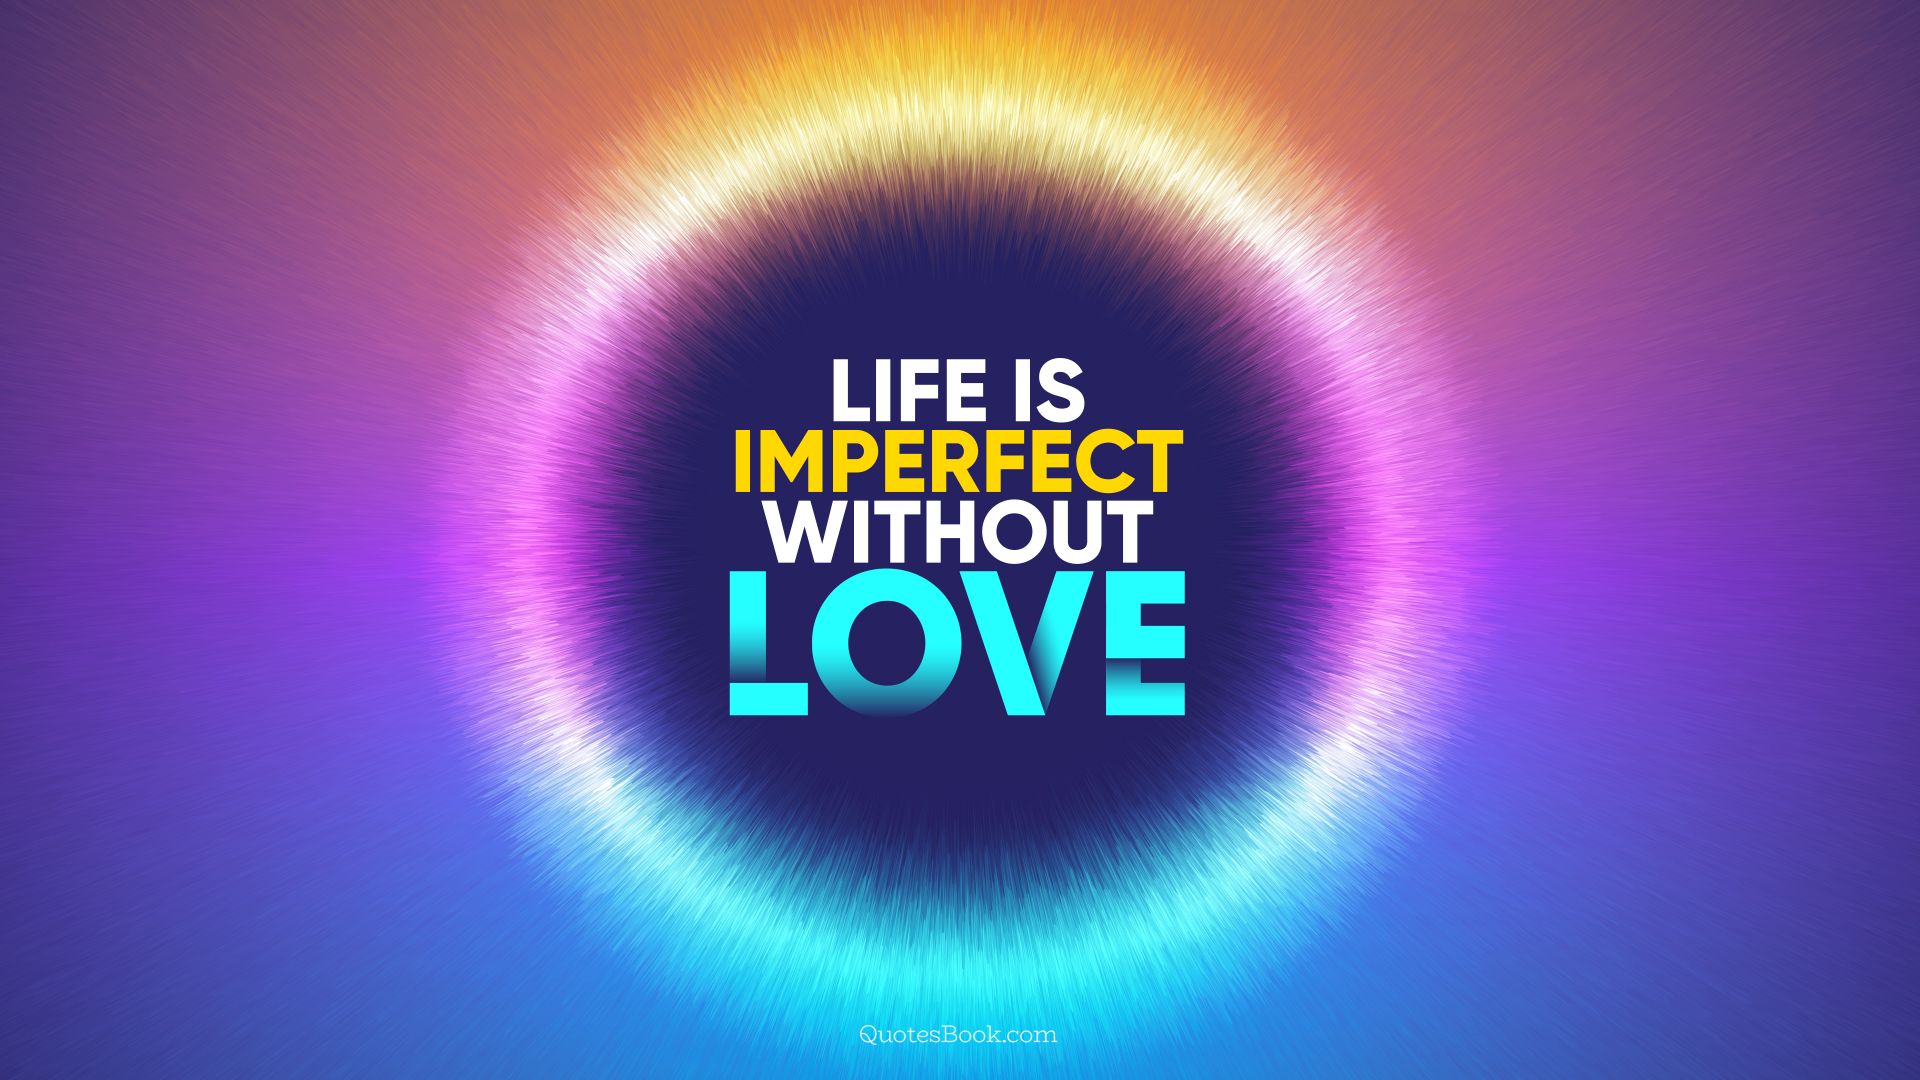 Life is imperfect without love